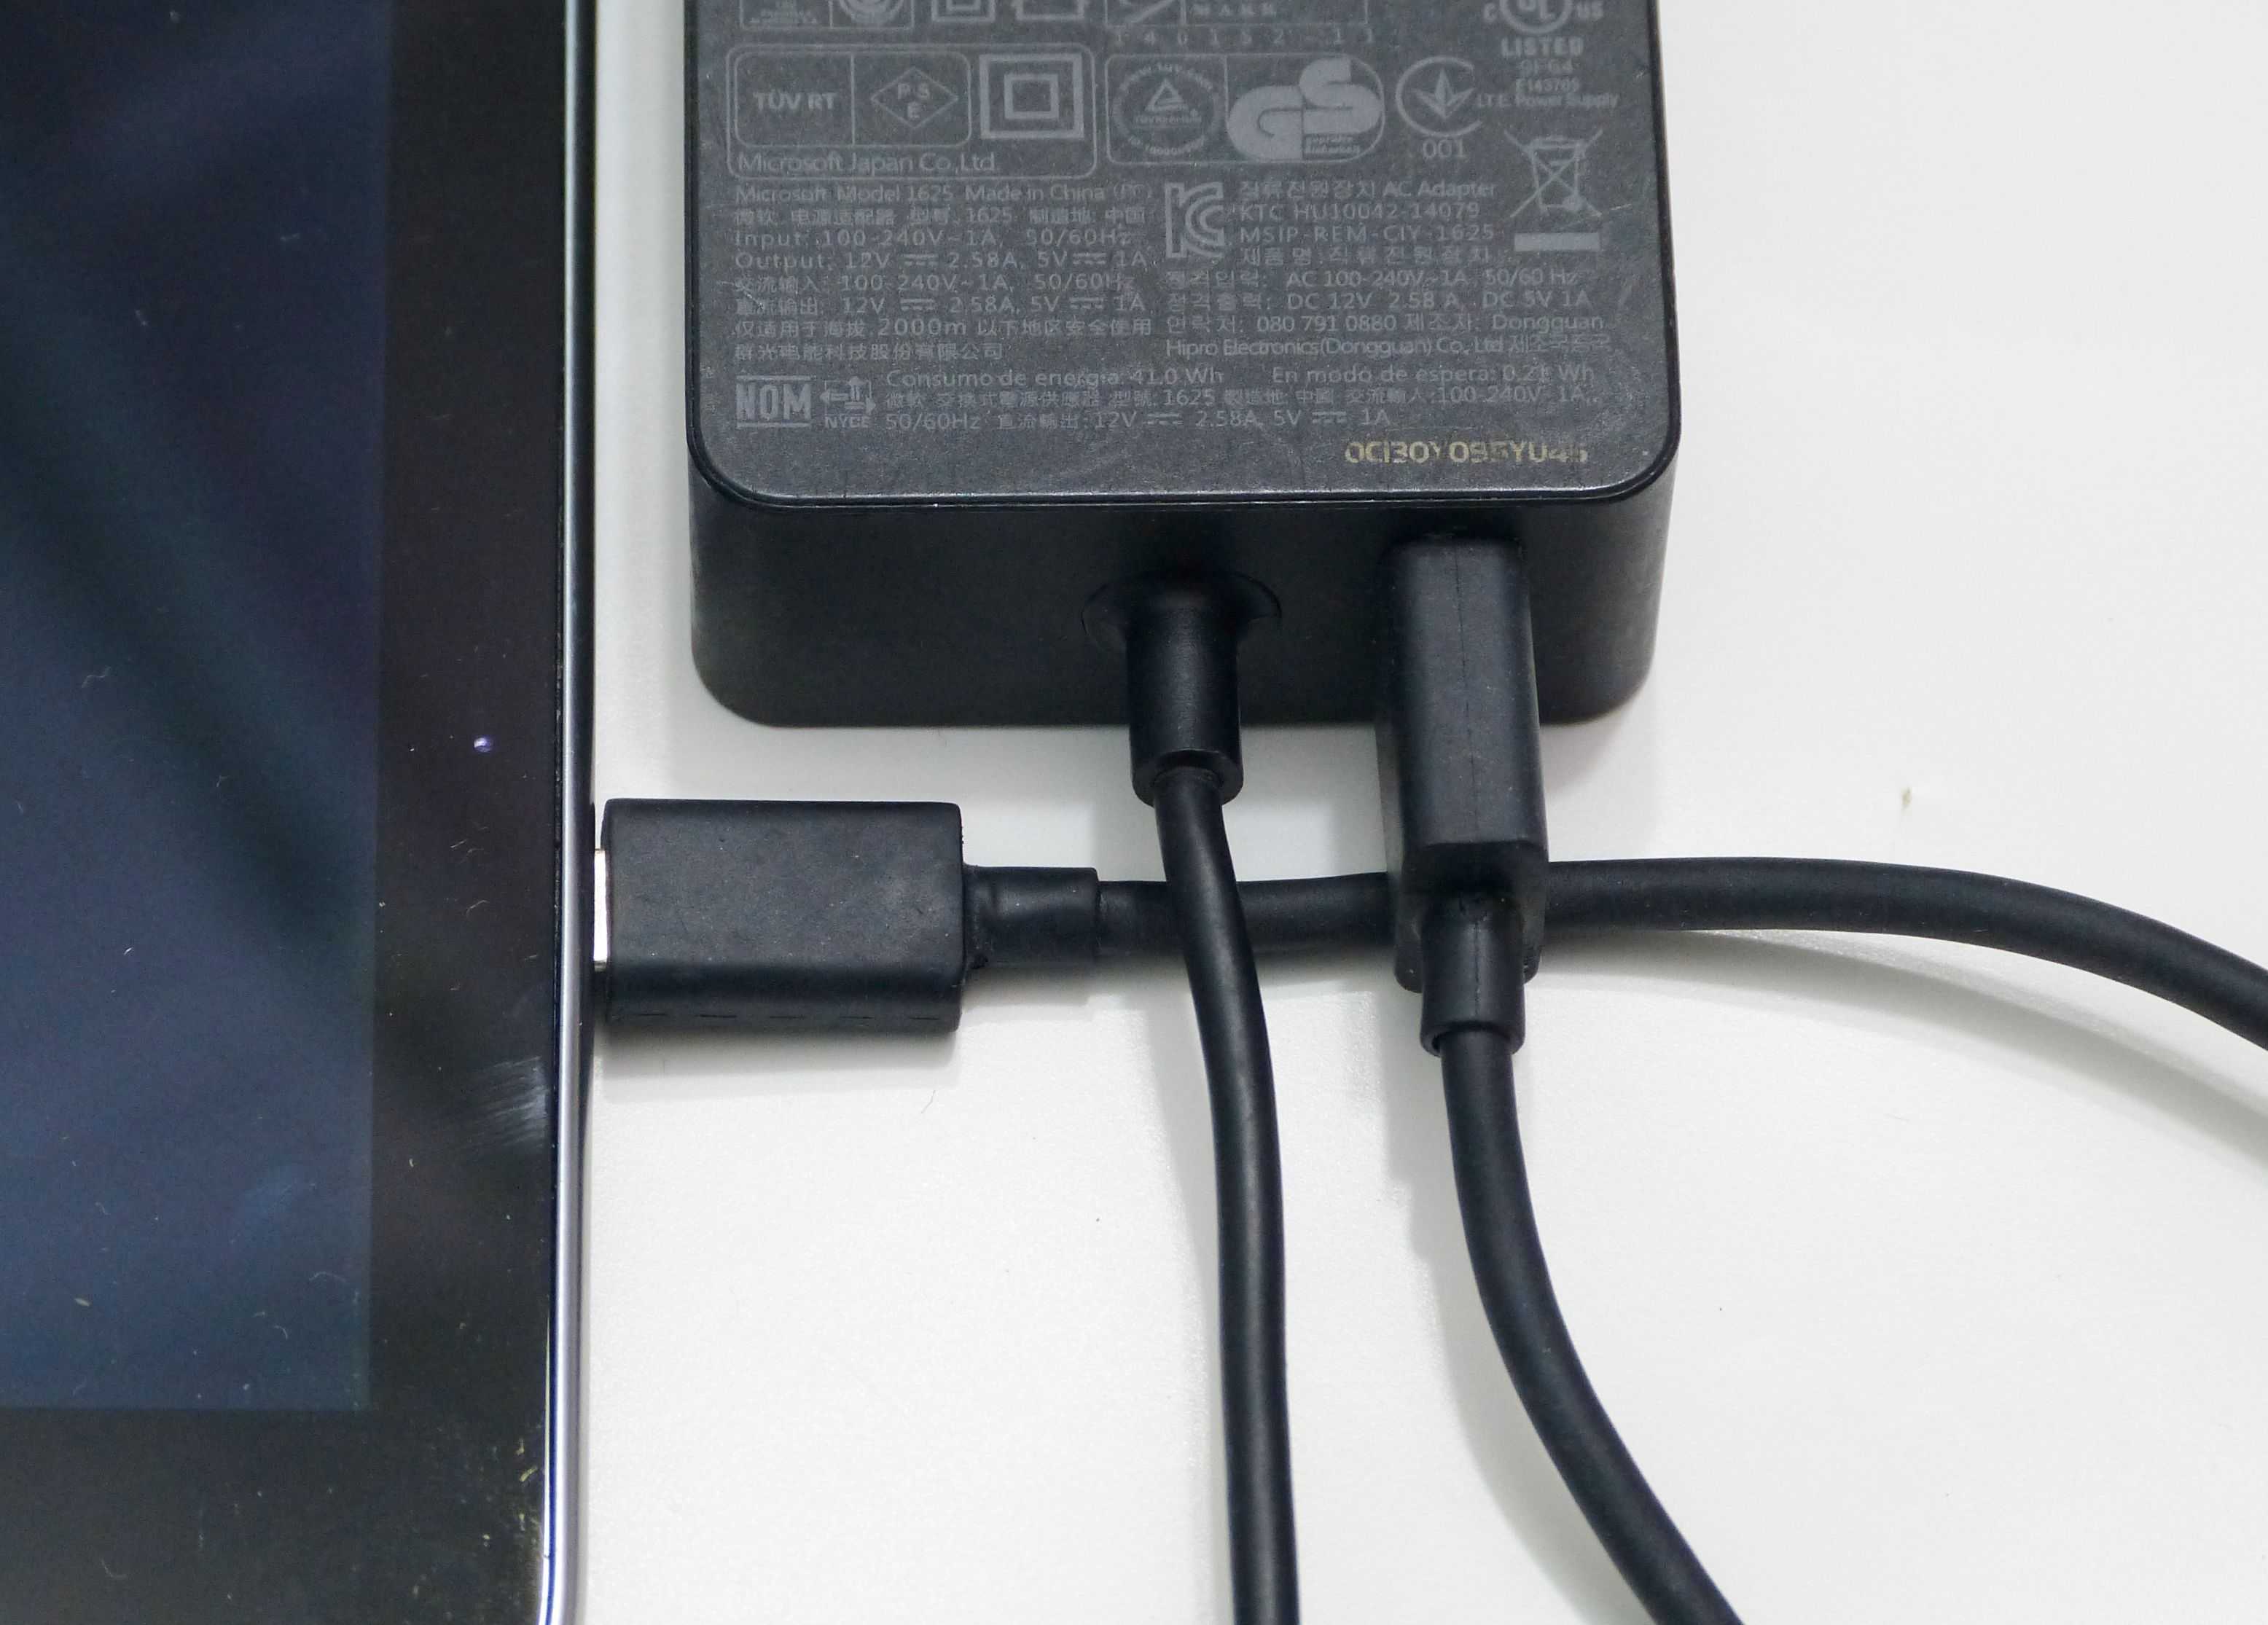 Surface Pro 3 power supply with 2A USB charging output.